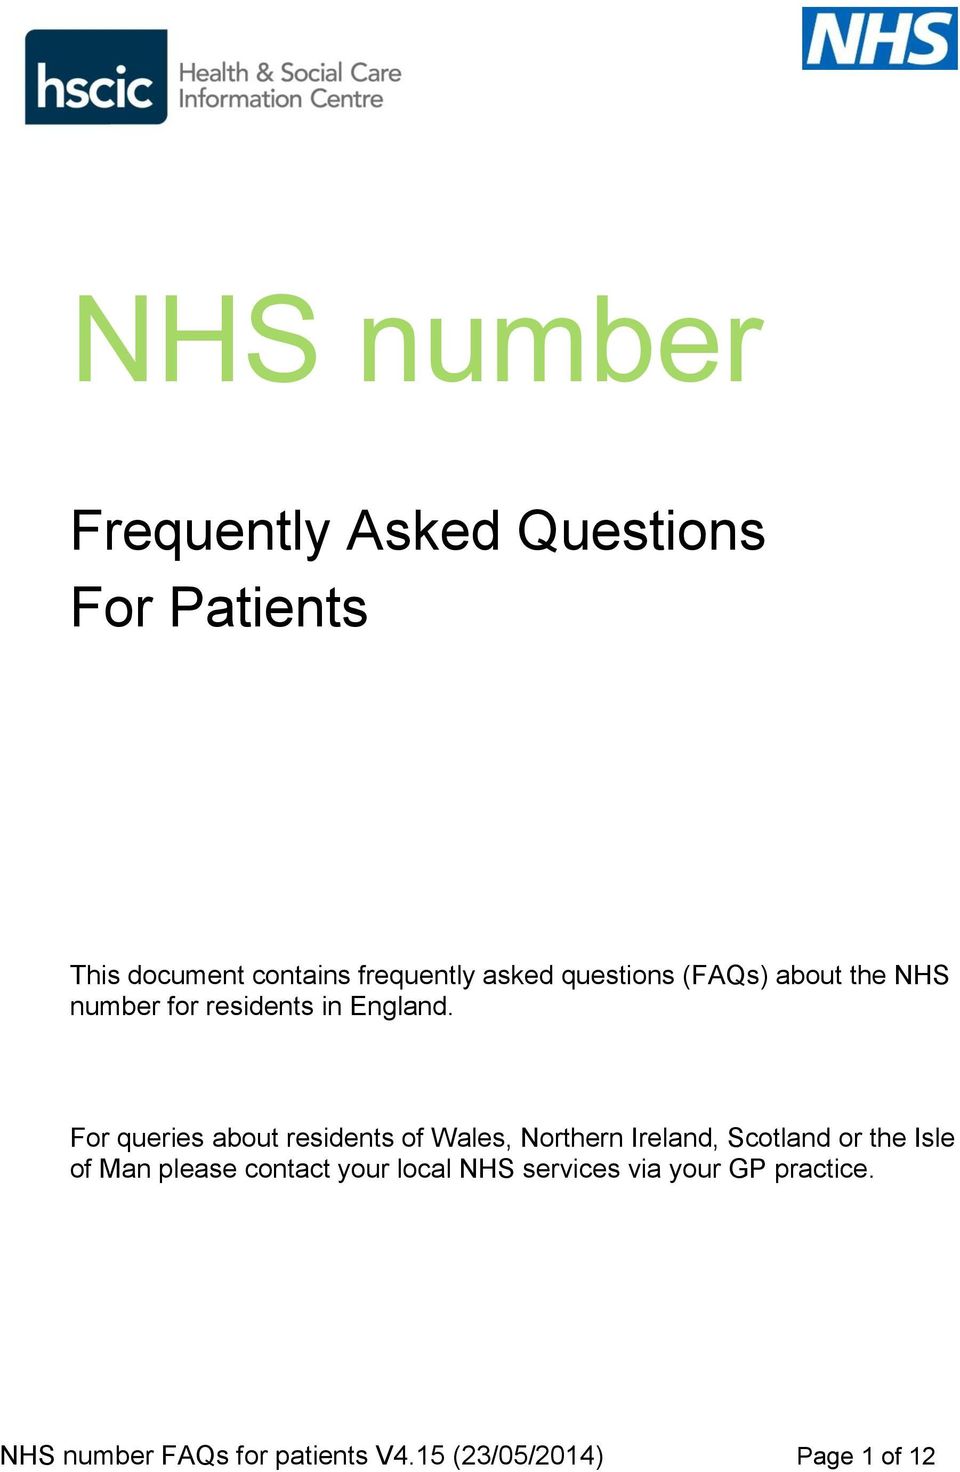 For queries about residents of Wales, Northern Ireland, Scotland or the Isle of Man